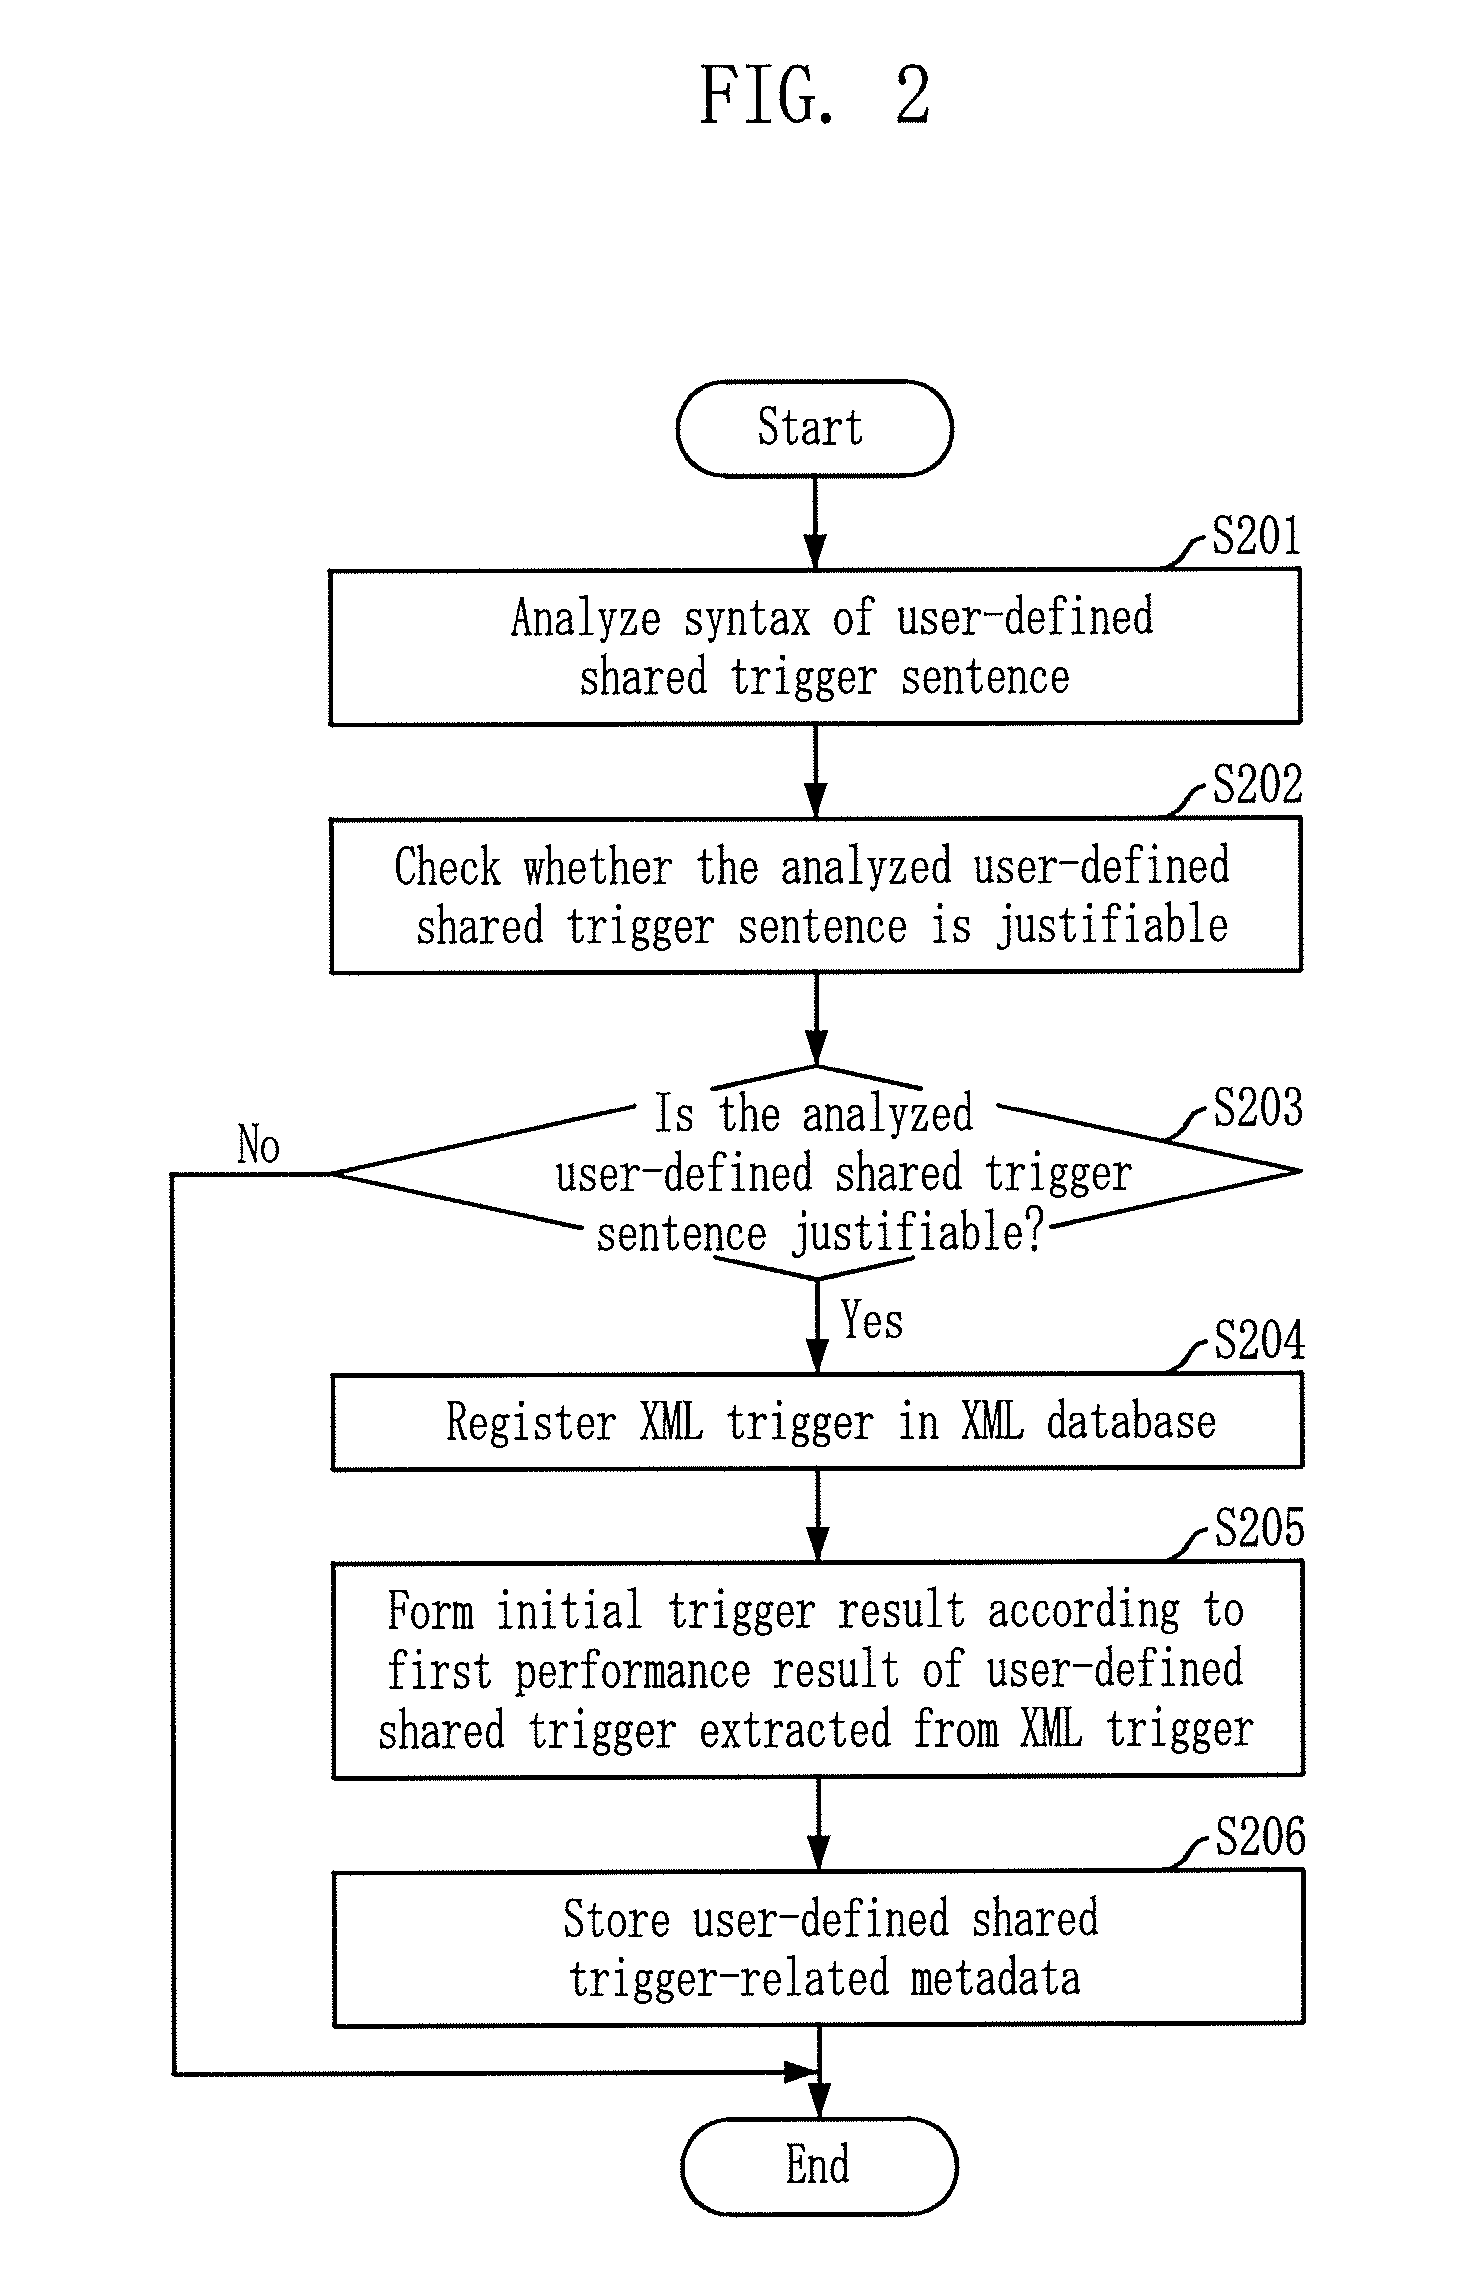 System and method for processing continuous integrated queries on both data stream and stored data using user-defined share trigger